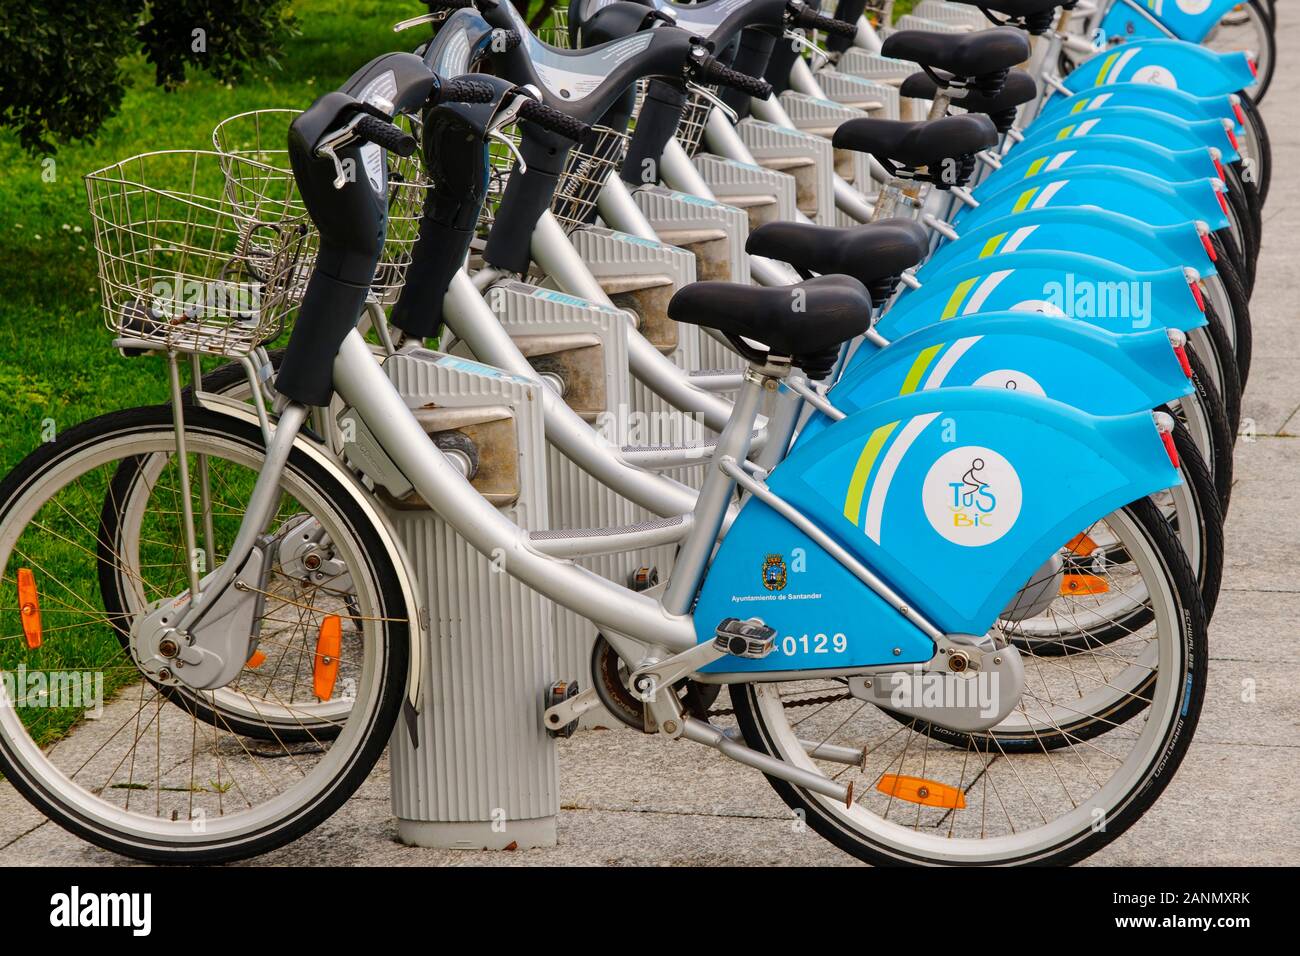 Santander Rental Bikes High Resolution Stock Photography and Images - Alamy